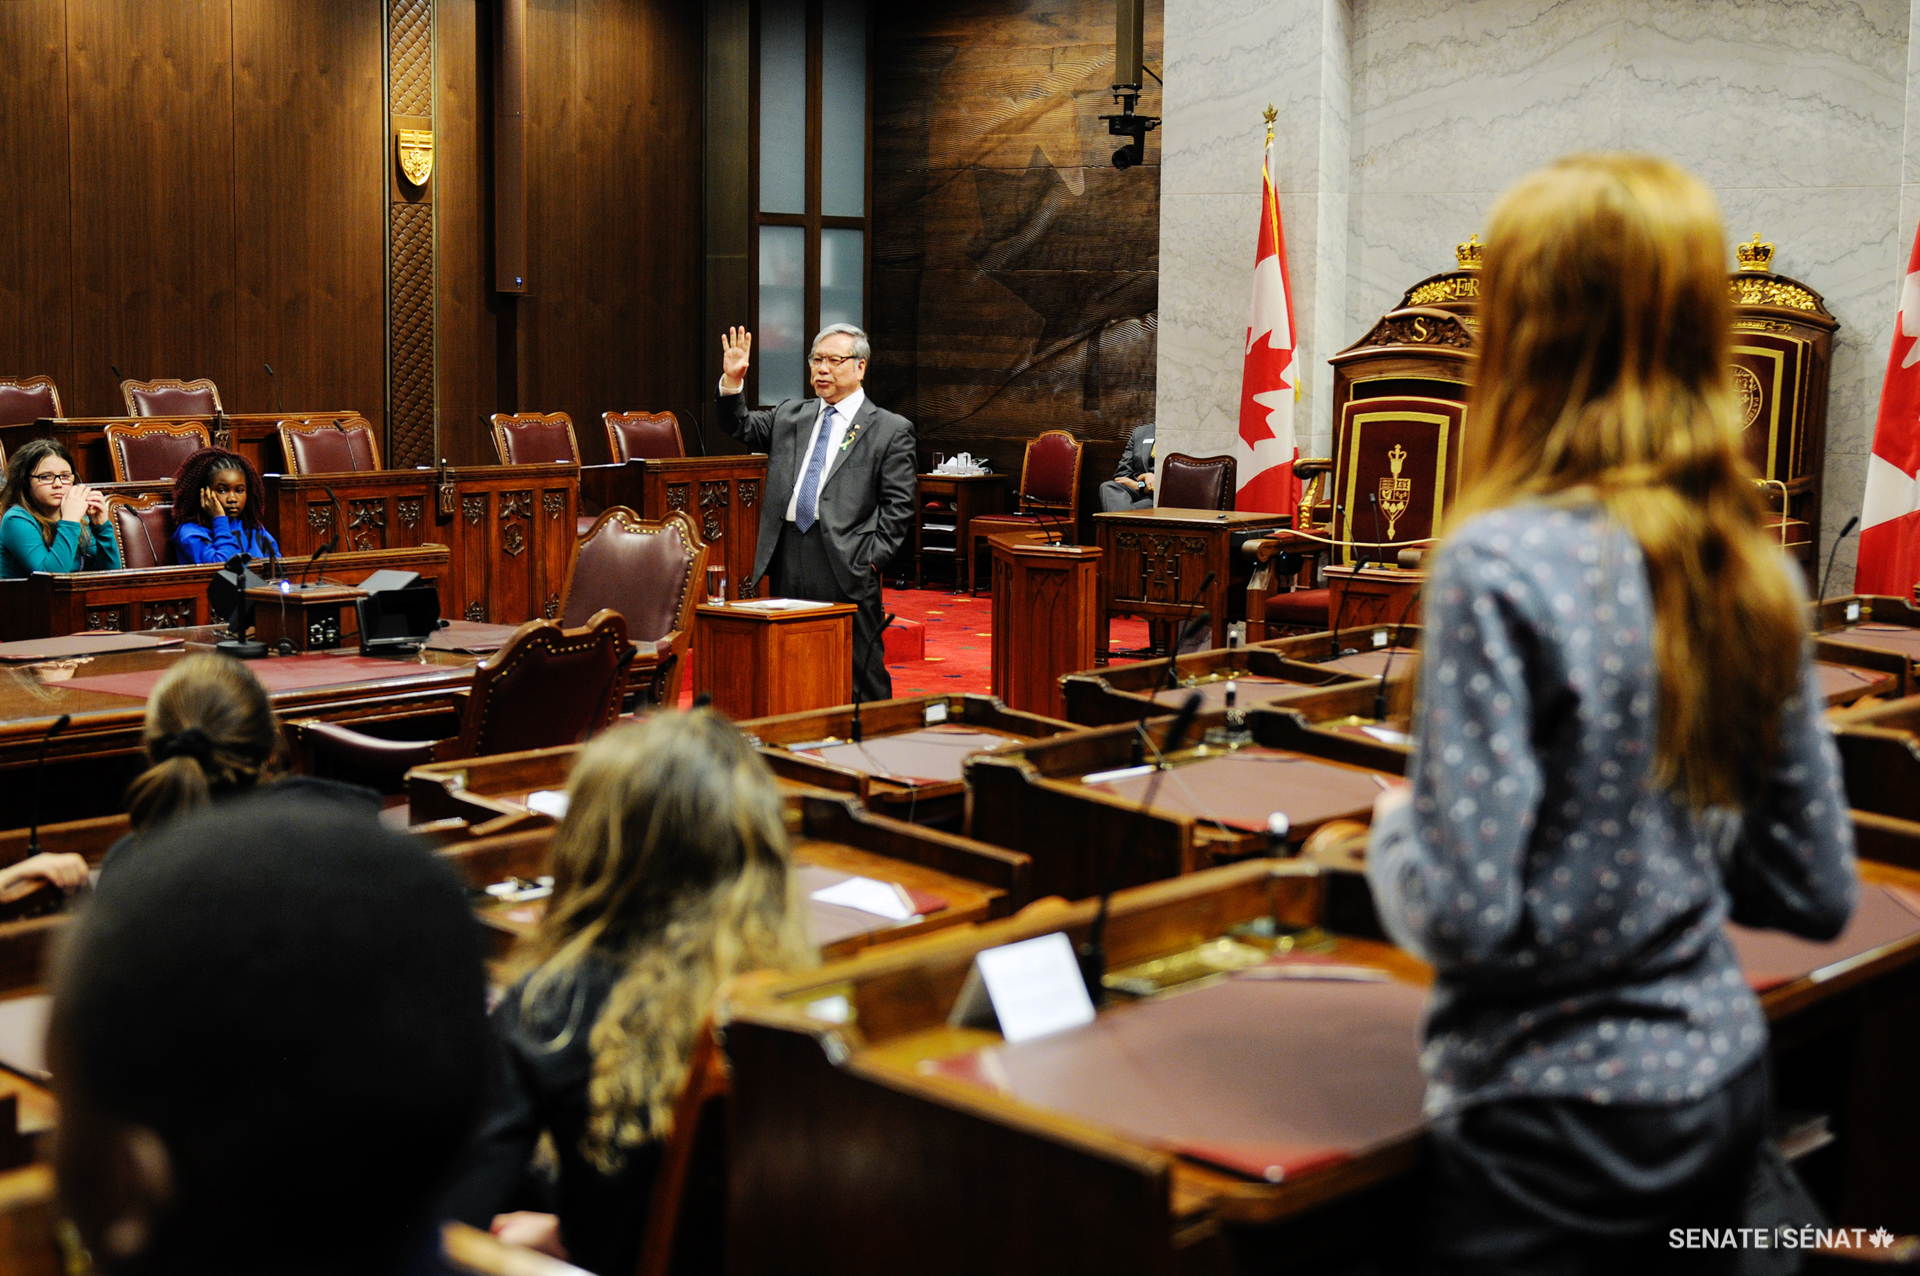 Senator Ngo takes a question from a student visiting the Senate Chamber in the Senate of Canada Building.